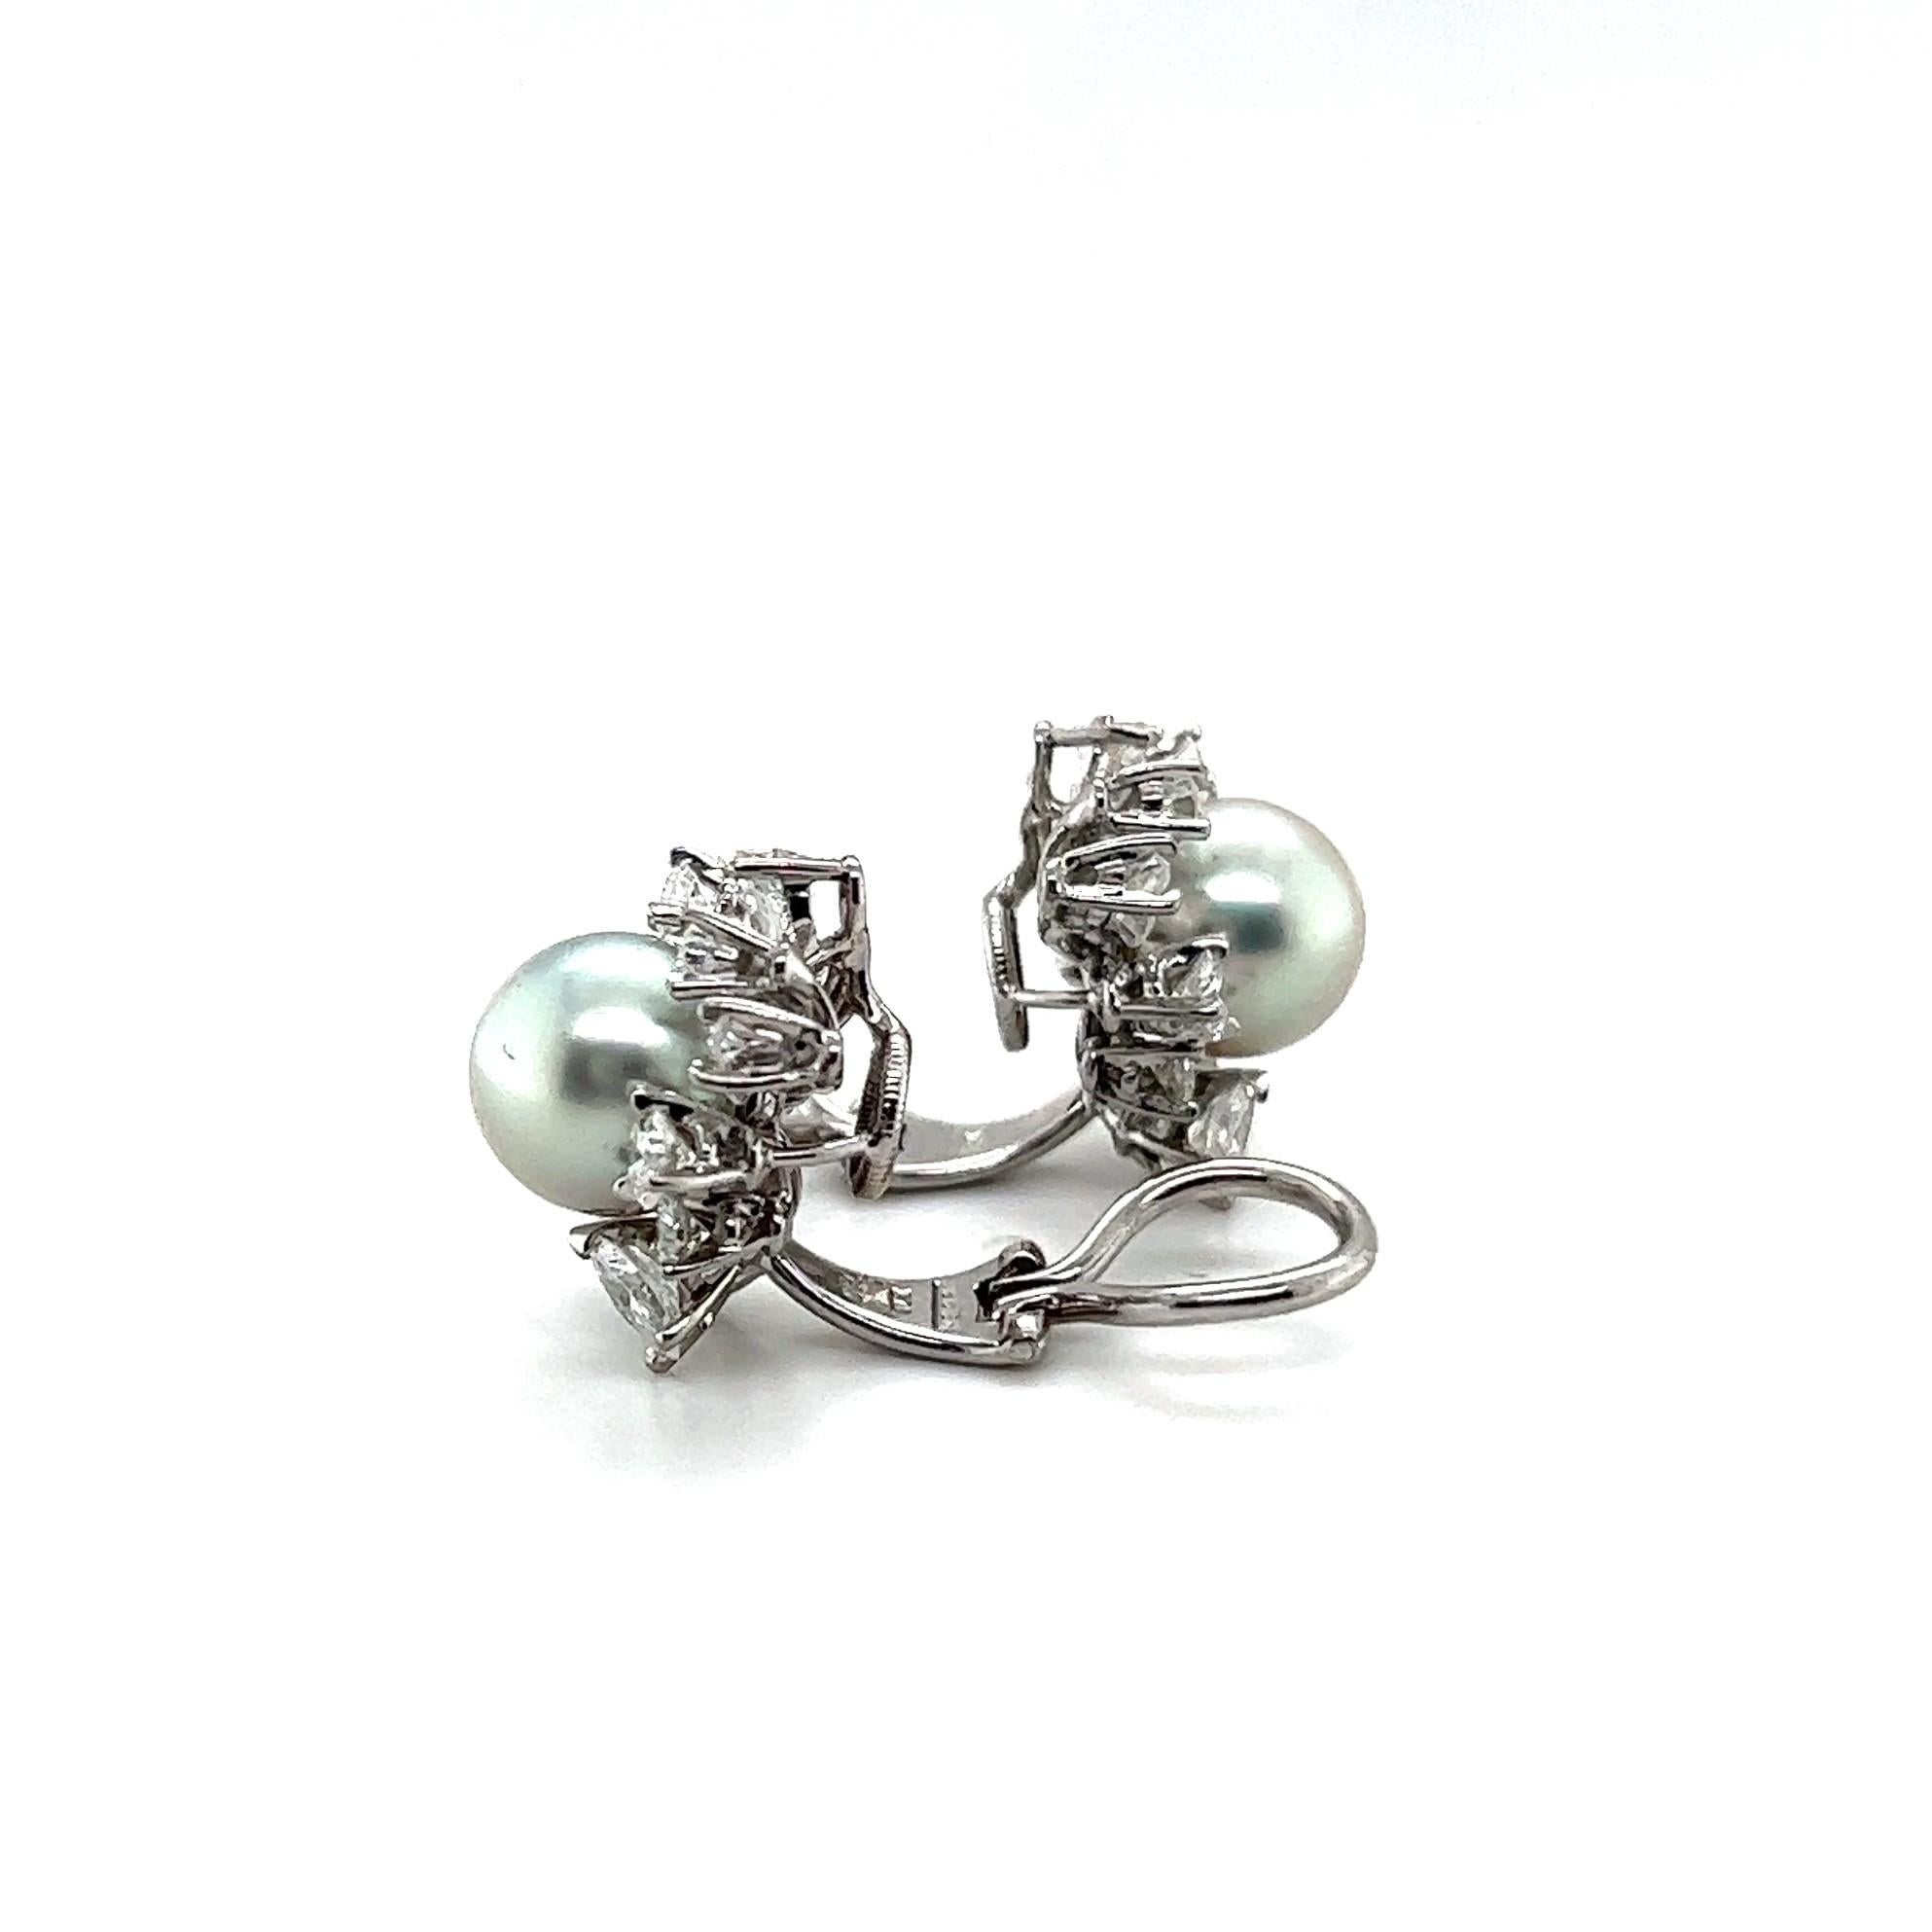 Clip-on Earrings with Pearls and Diamonds in 18 Karat White Gold by Meister 4